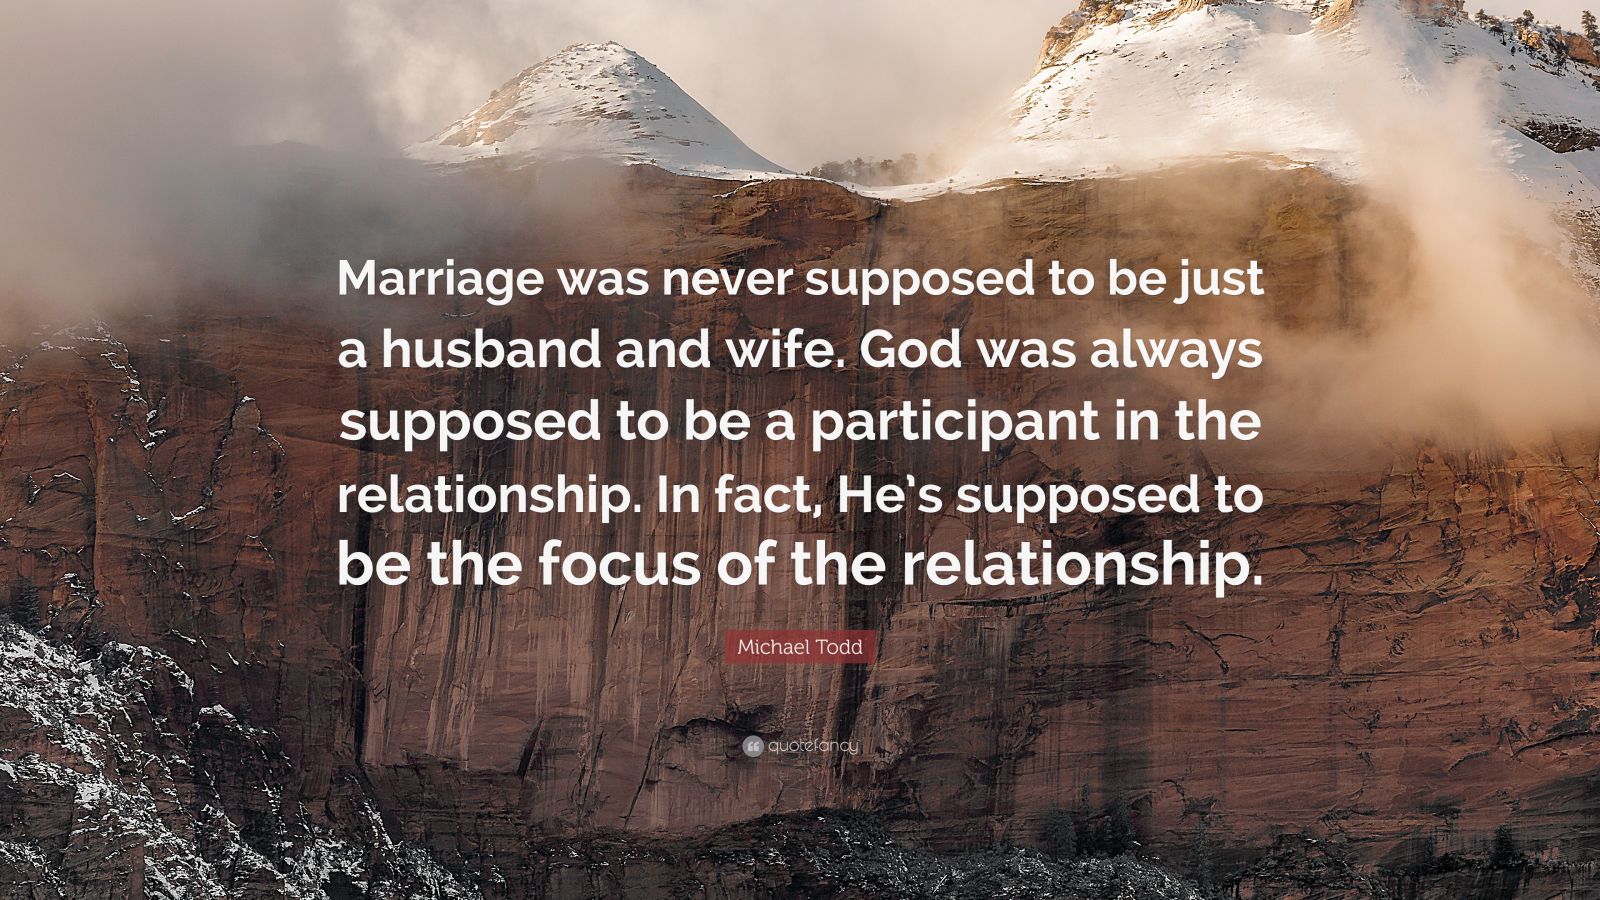 Michael Todd Quote: “Marriage was never supposed to be just a husband ...